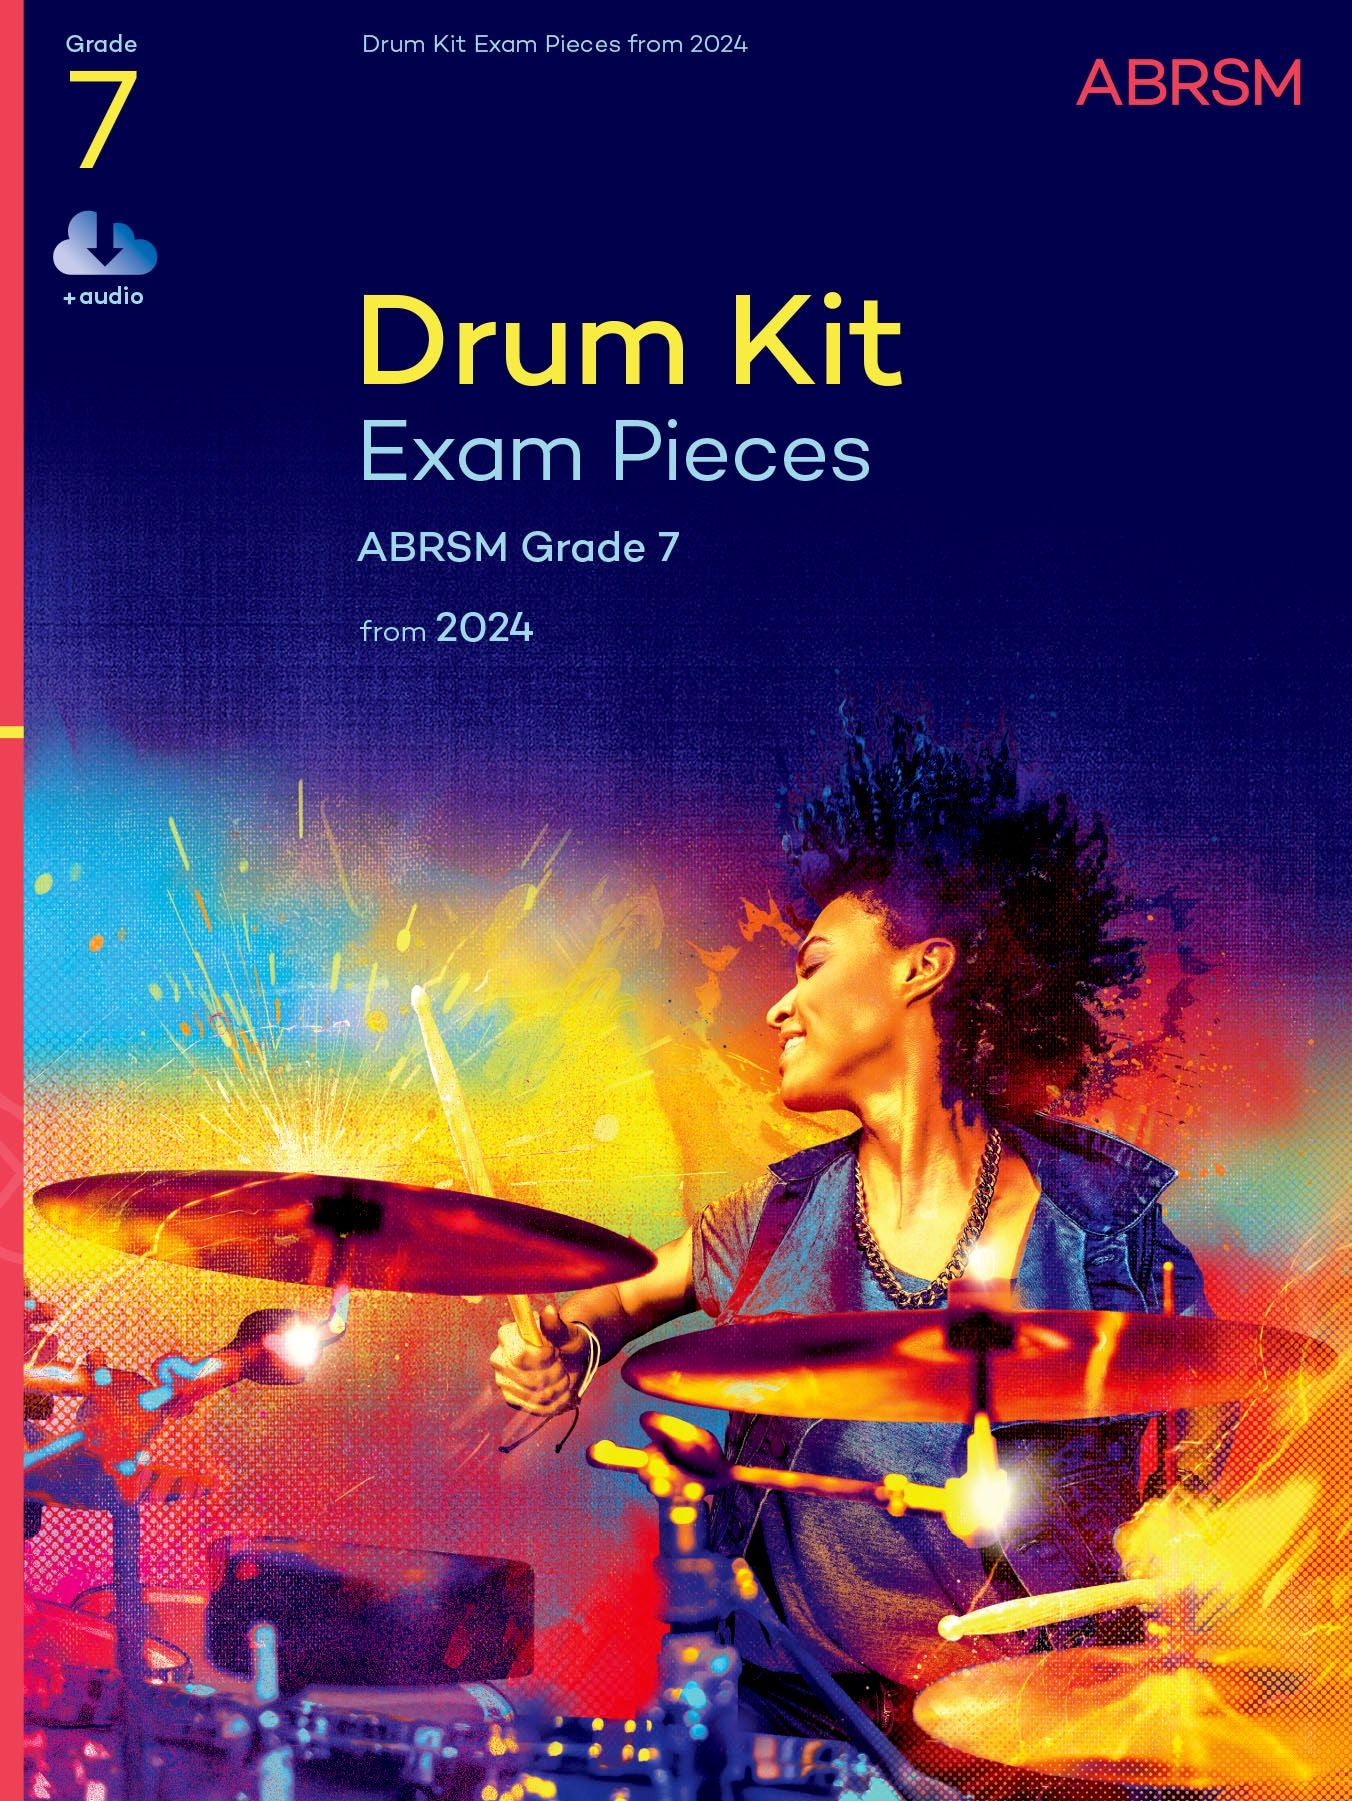 ABRSM Drum Kit Exam Pieces Grade 7 from 2024 (w/ Audio)